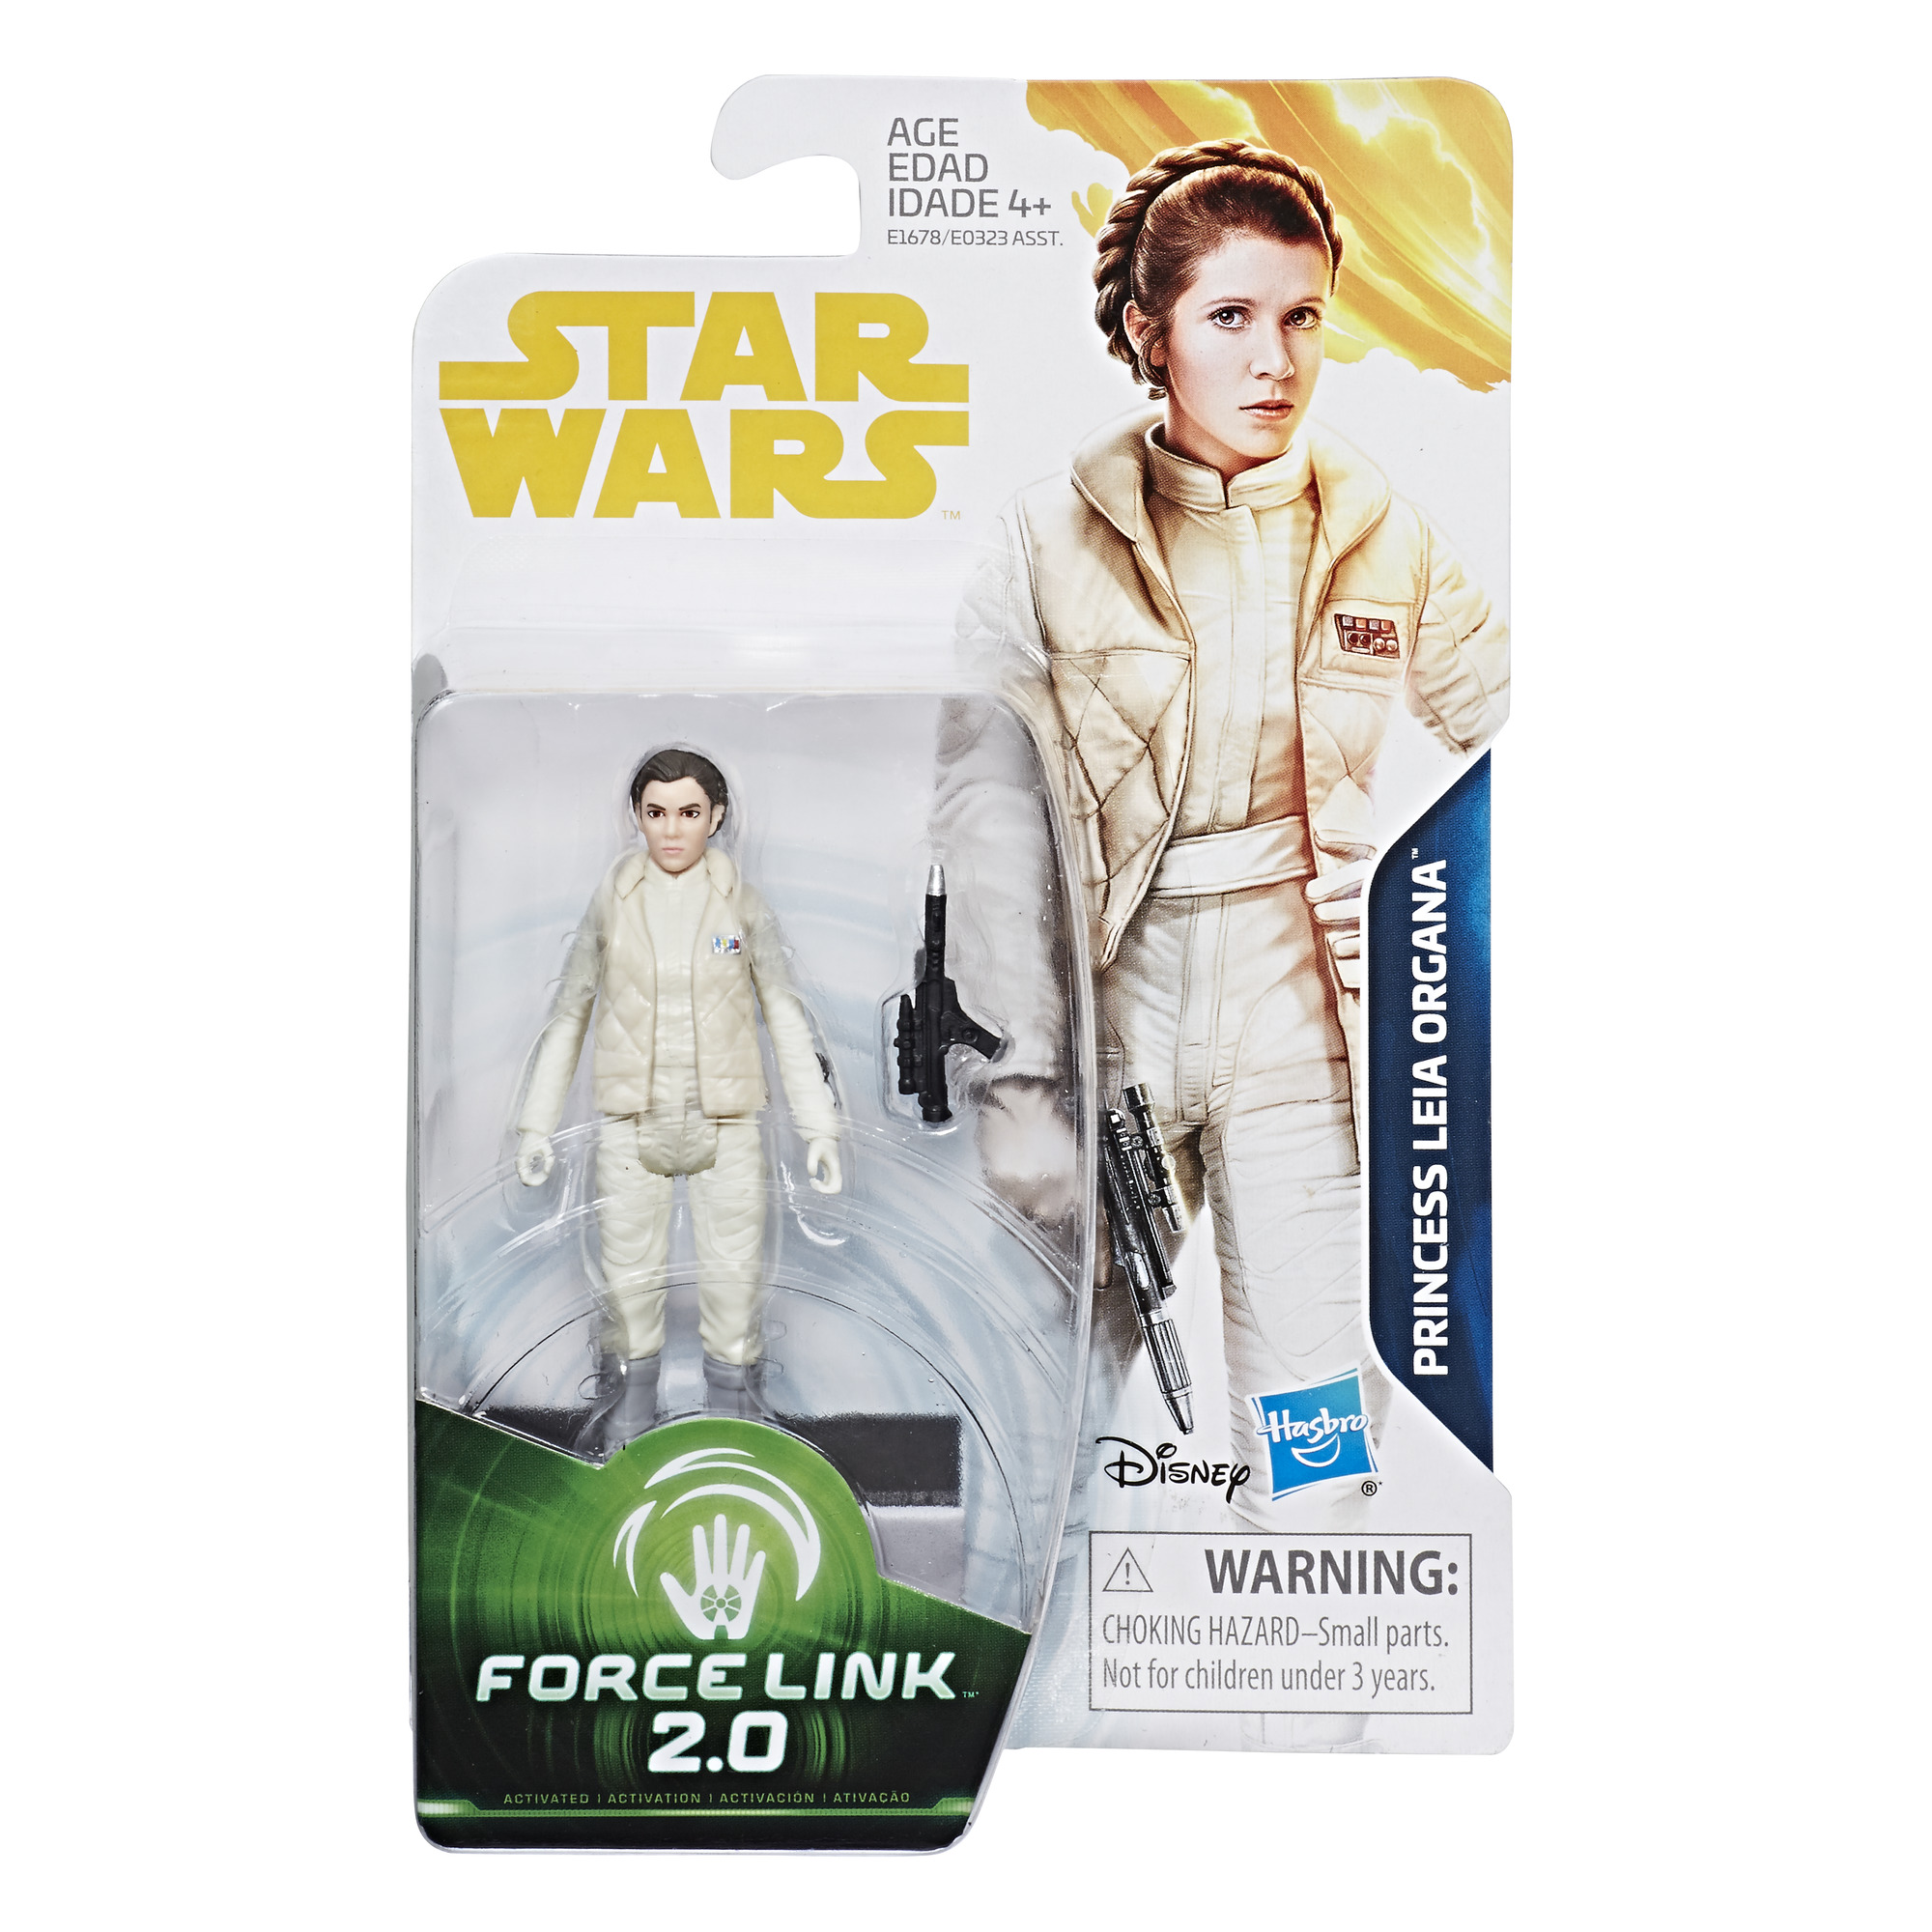 Star Wars Universe Force Link 2.0 3.75 Inch Action Figure Series 2 - Princess Leia Organa - image 1 of 2